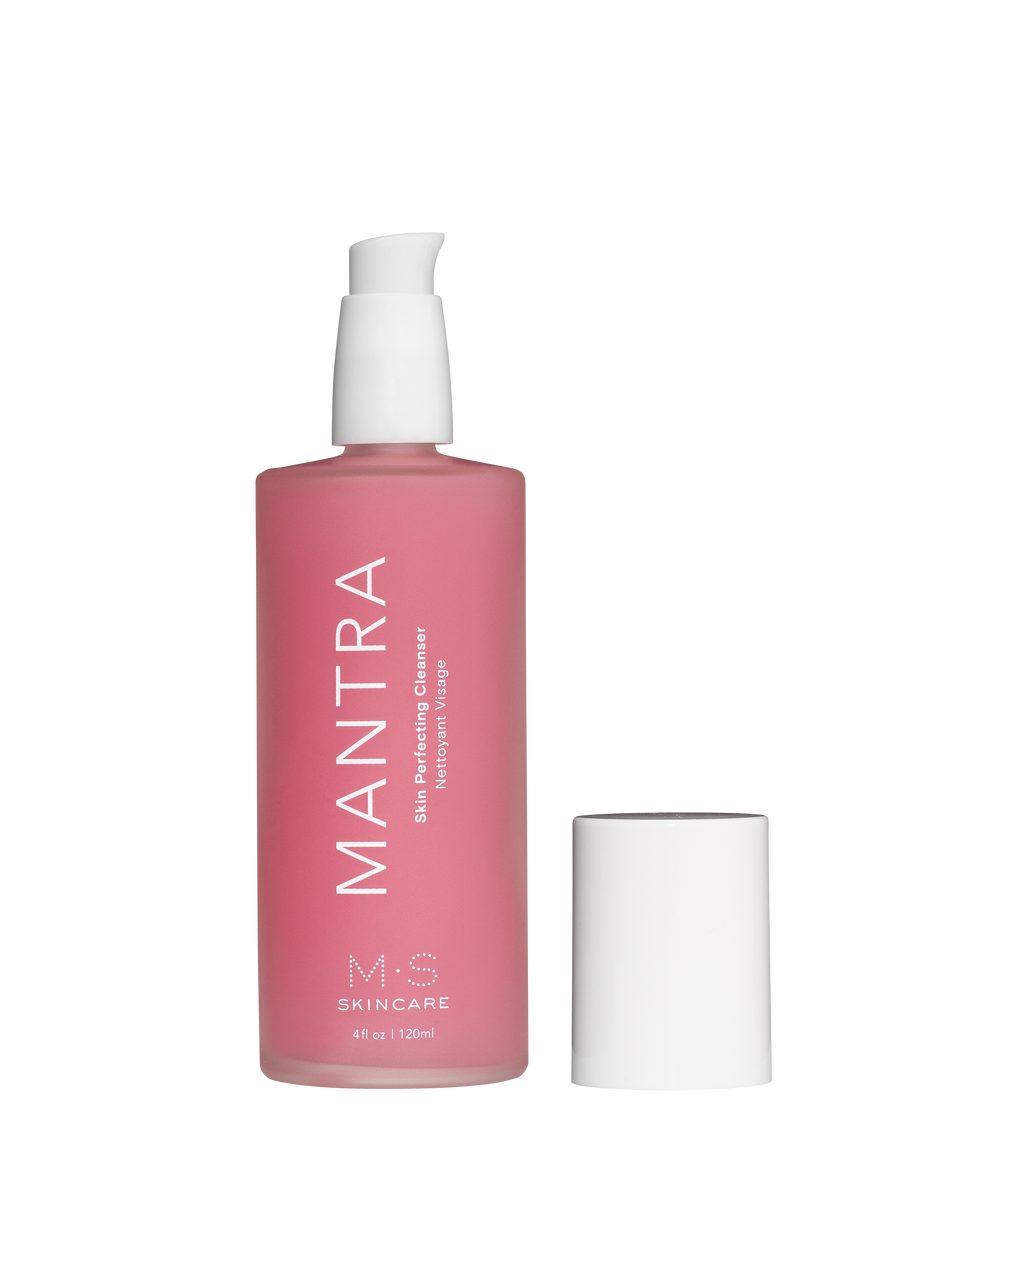 MANTRA | Skin Perfecting Cleanser